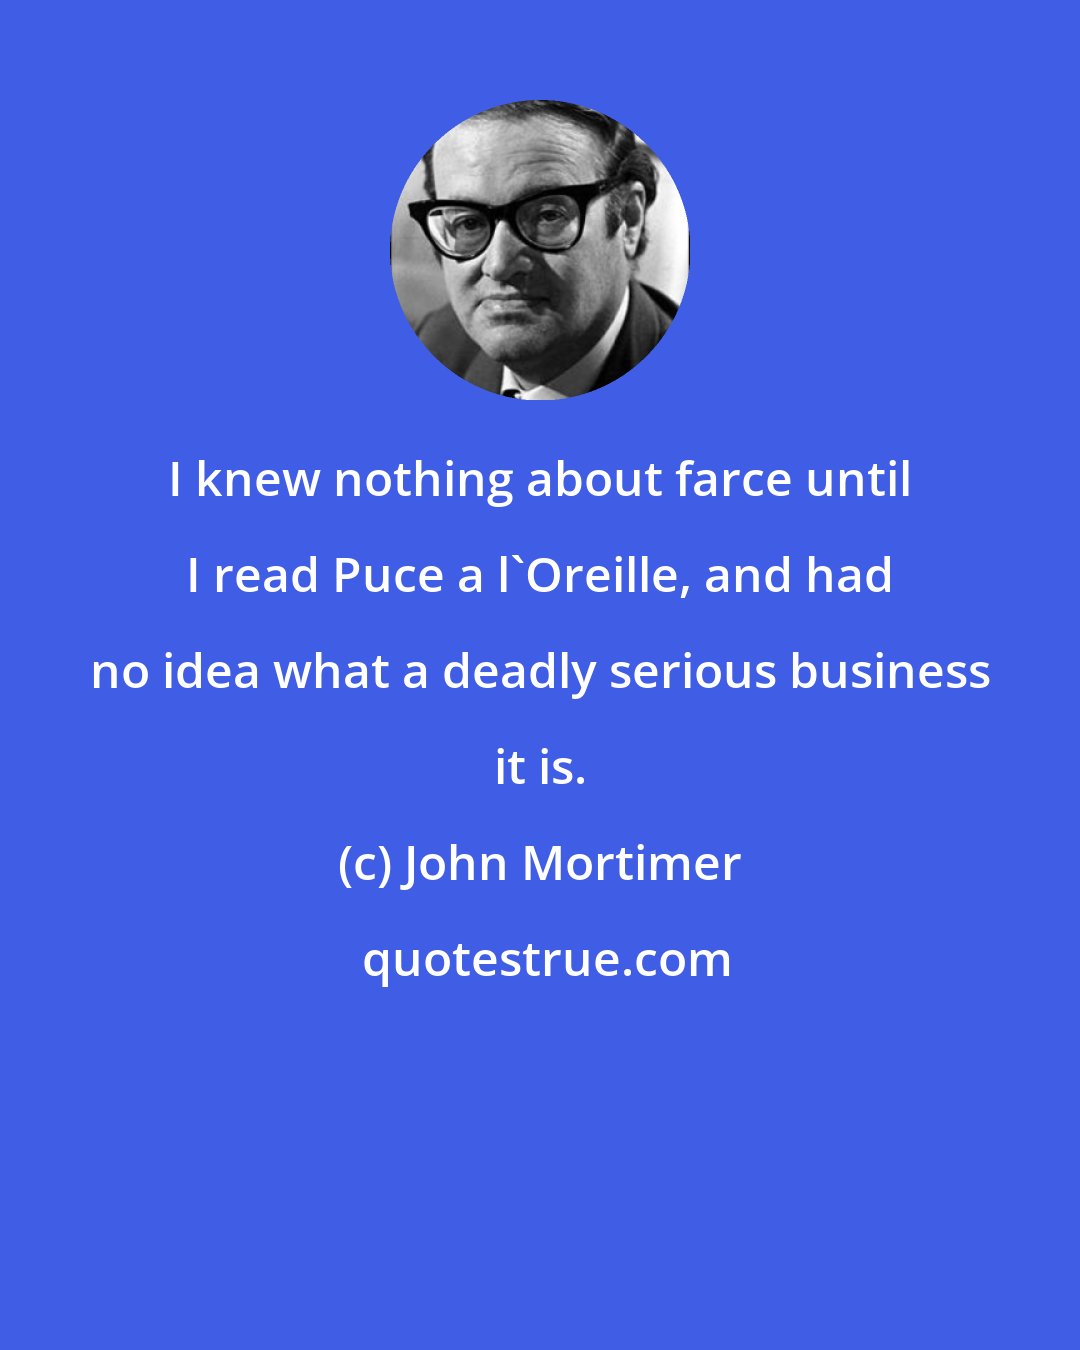 John Mortimer: I knew nothing about farce until I read Puce a l'Oreille, and had no idea what a deadly serious business it is.